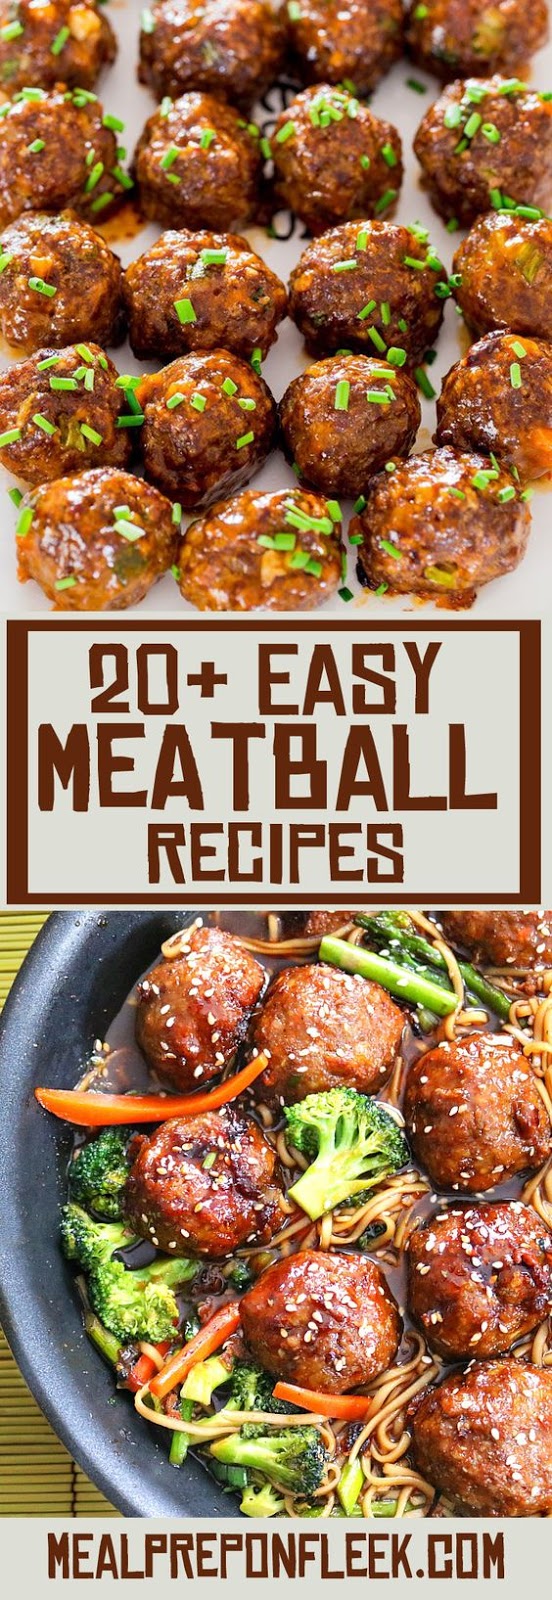 The Ultimate Guide To Meatballs Recipes - Just One Cookbook